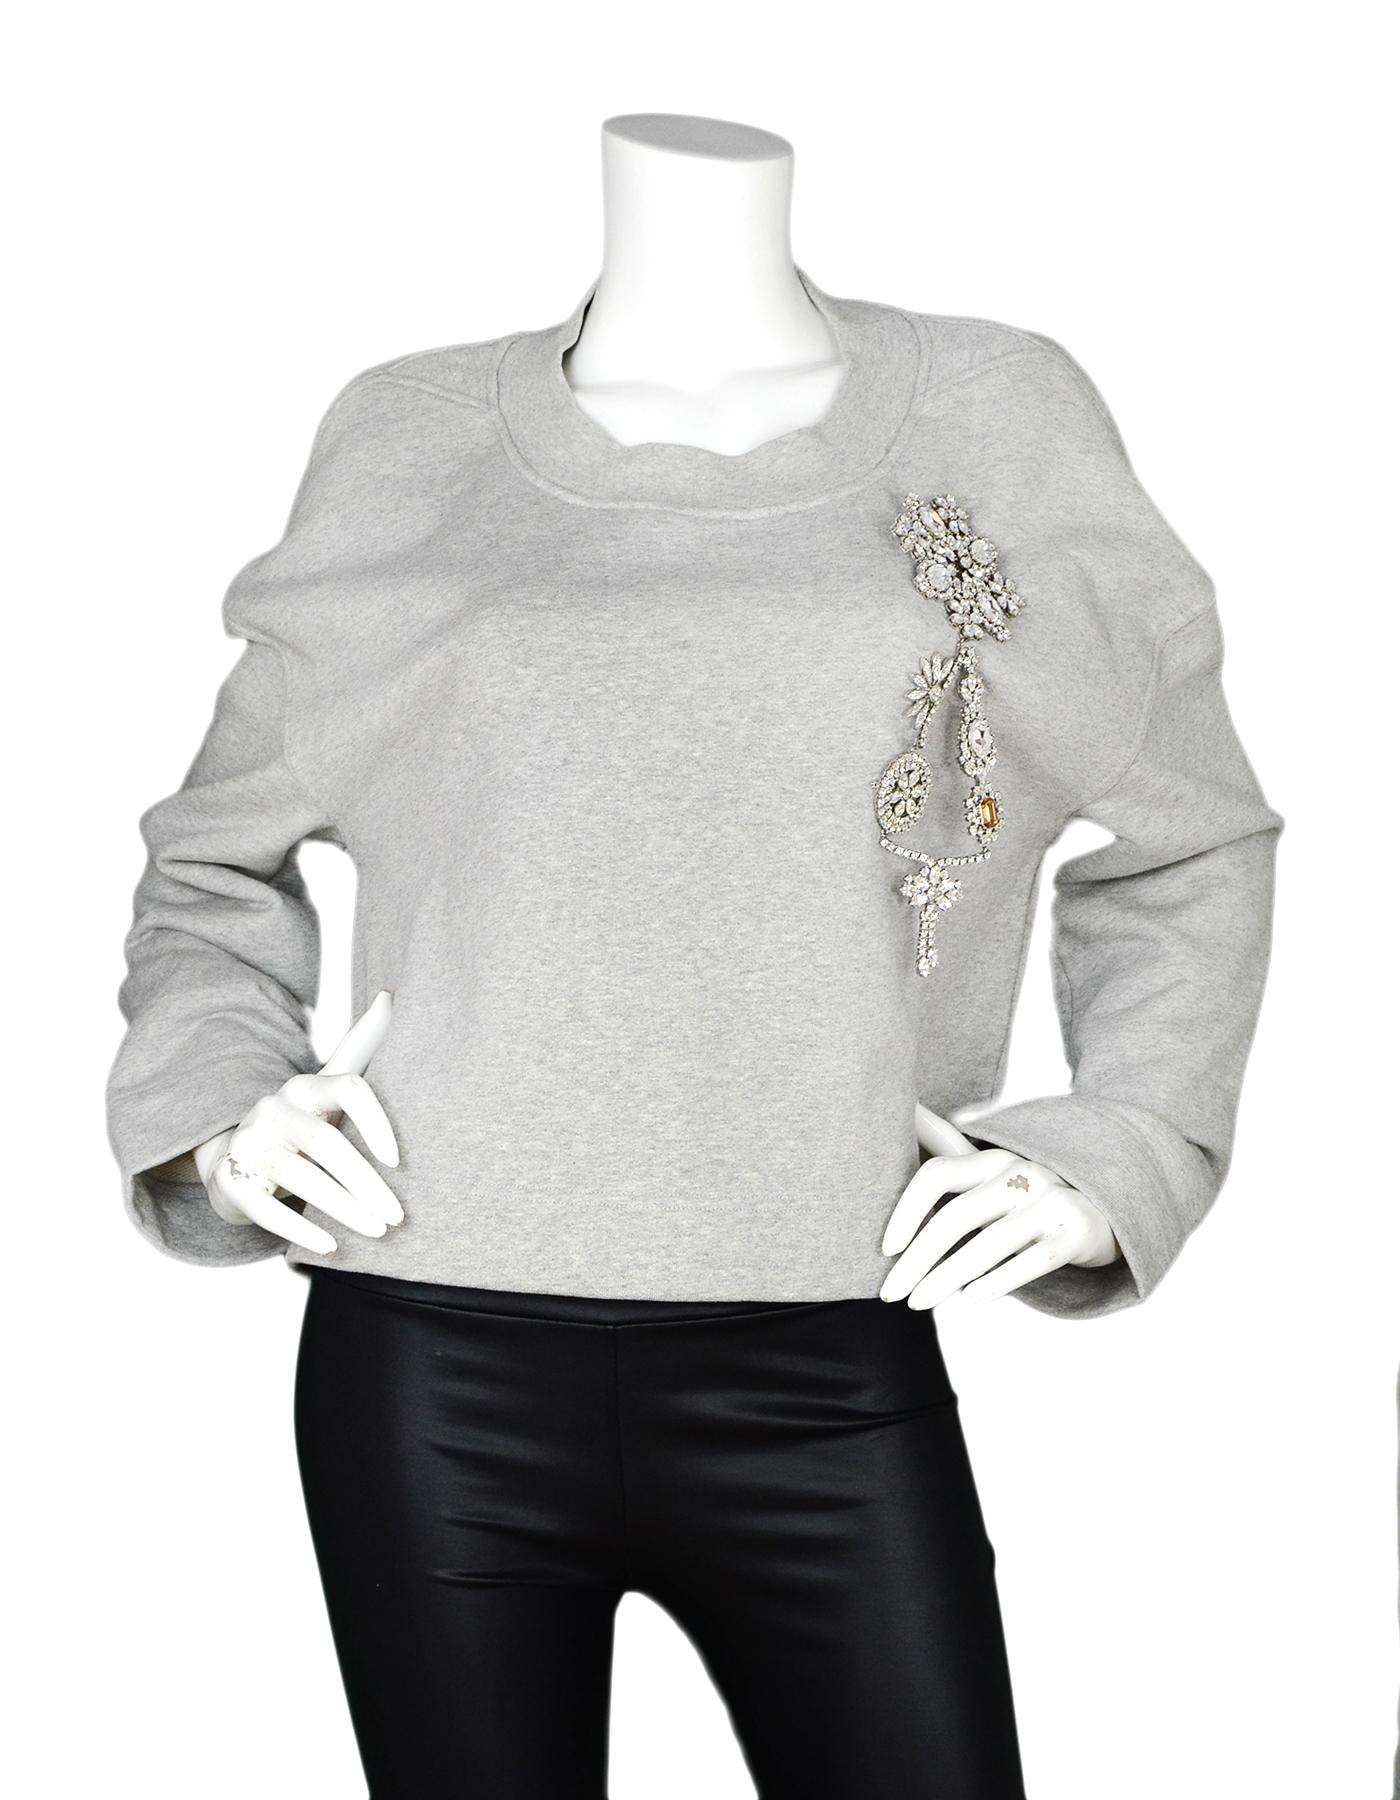 Burberry Grey Cropped Crystal Brooch Sweatshirt Sz S

Made In:  Italy
Color: Grey
Materials: 100% cotton, metal and crystals
Opening/Closure: Pull over
Overall Condition: Excellent pre-owned condition 

Measurements: 
Shoulder To Shoulder: 25